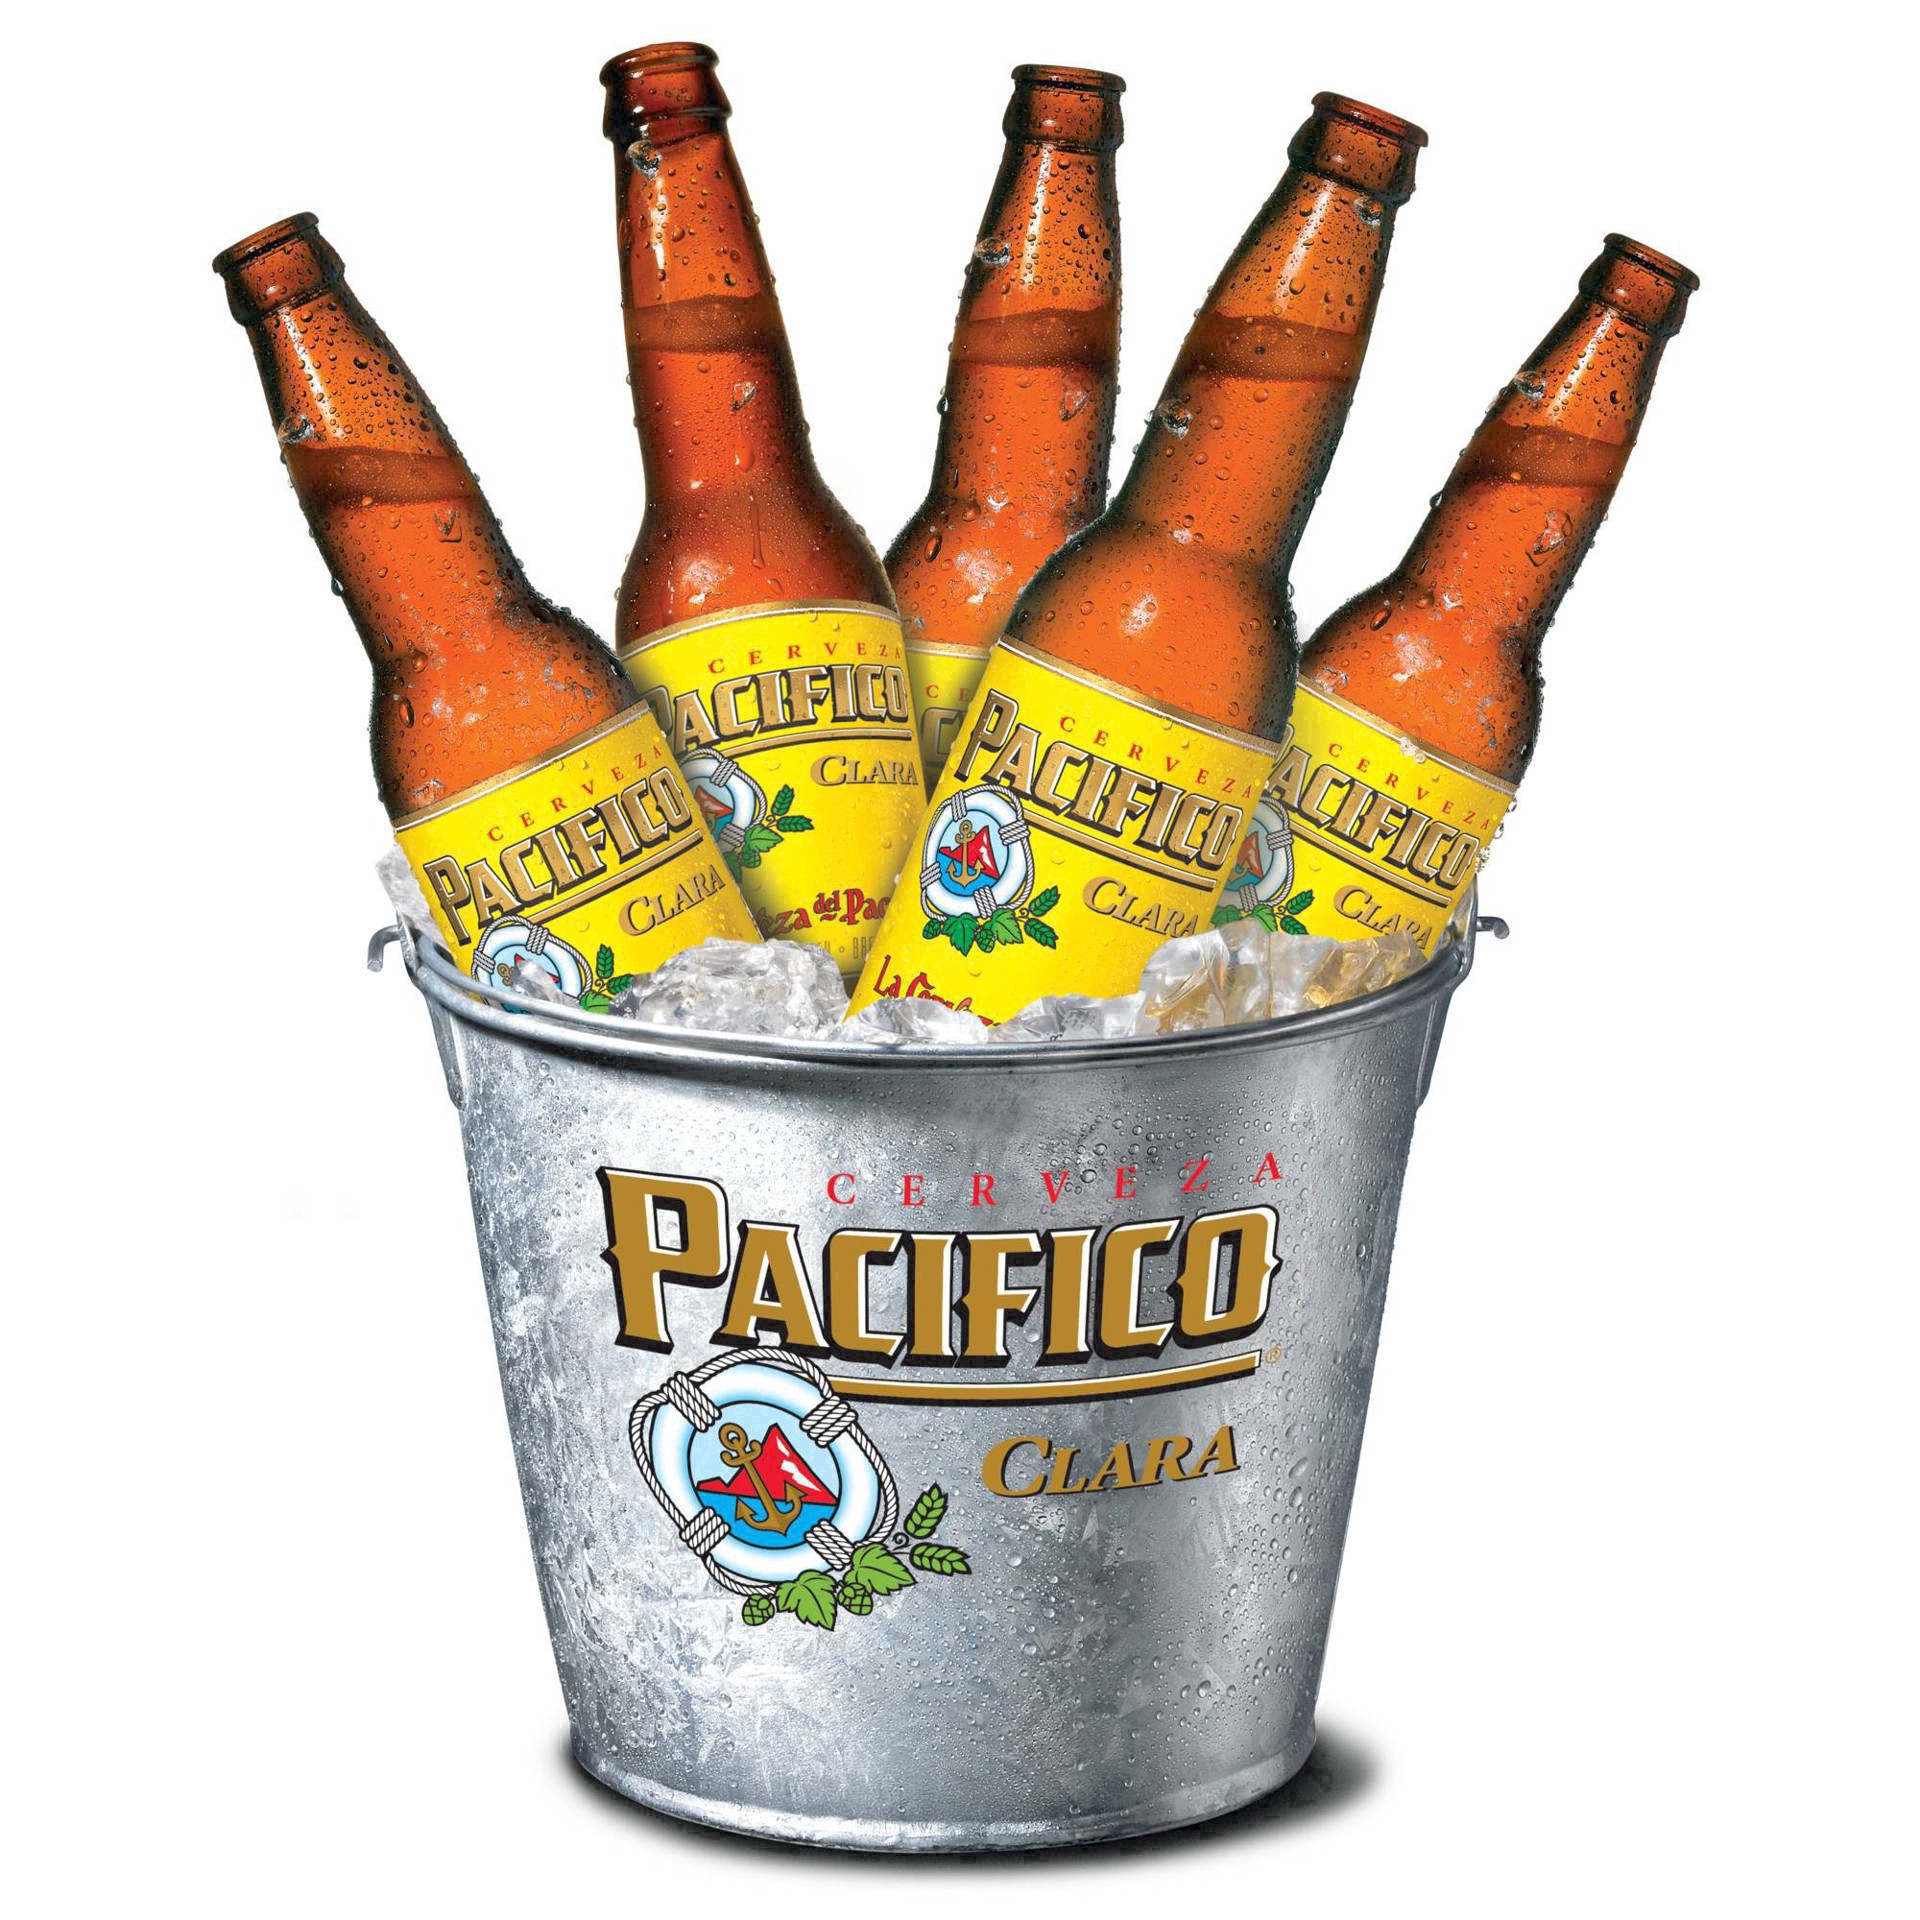 slide 4 of 79, Pacifico Clara Lager Mexican Beer Bottles, 12 ct; 12 oz